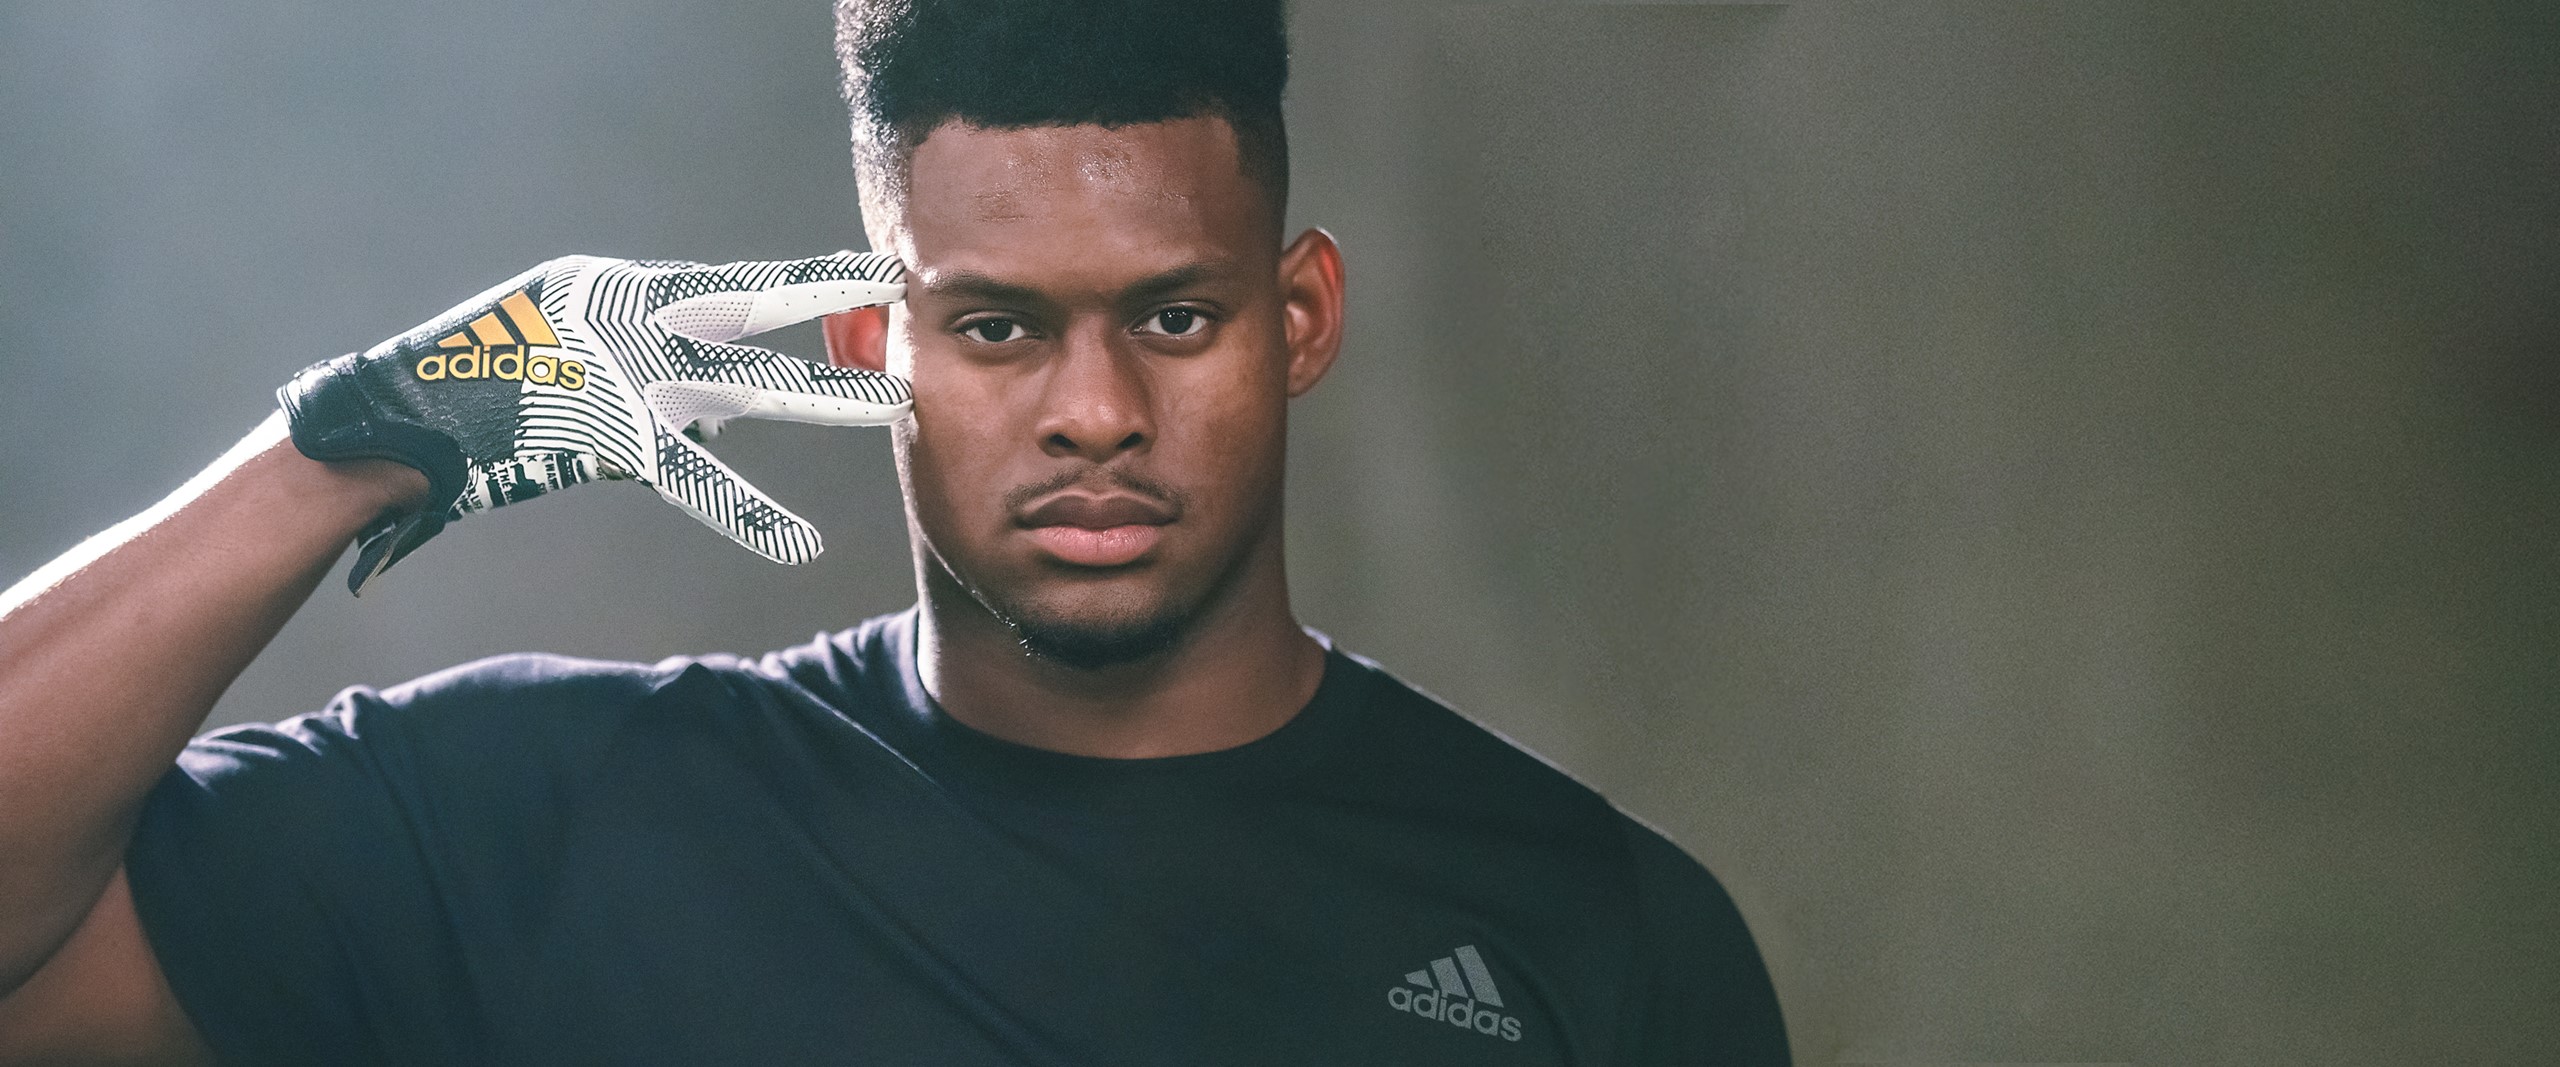 Adidas News Site Press Resources For All Brands Sports And Innovations Juju Smith Schuster